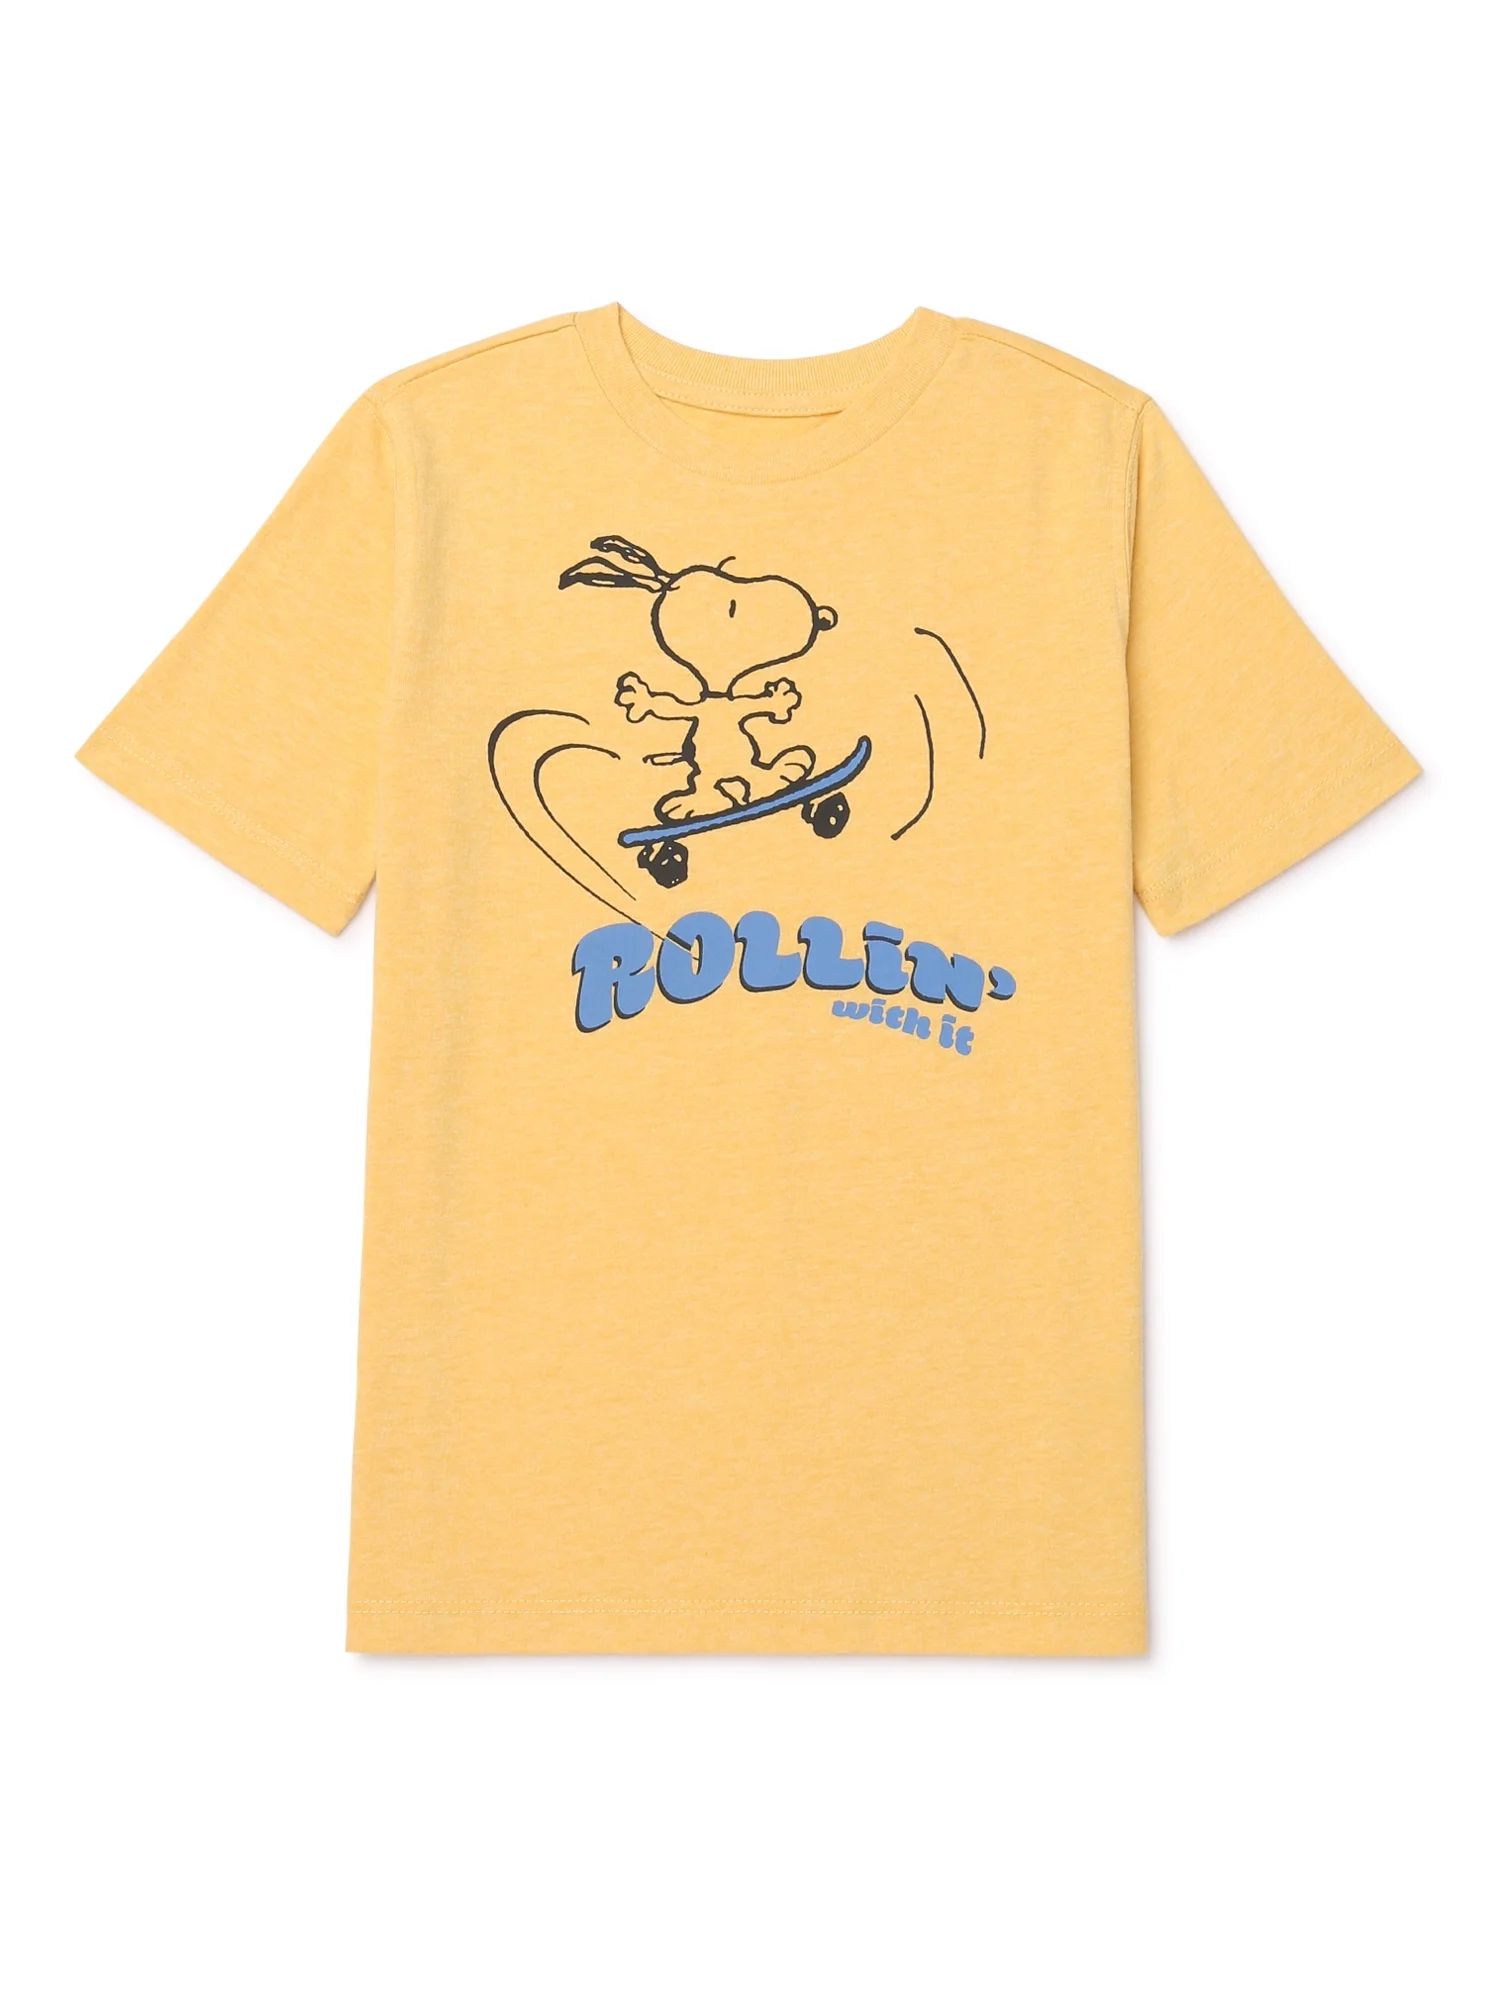 365 Kids from Garanimals Boys Mix and Match Snoopy Tee with Short Sleeves, Sizes 4-10 | Walmart (US)